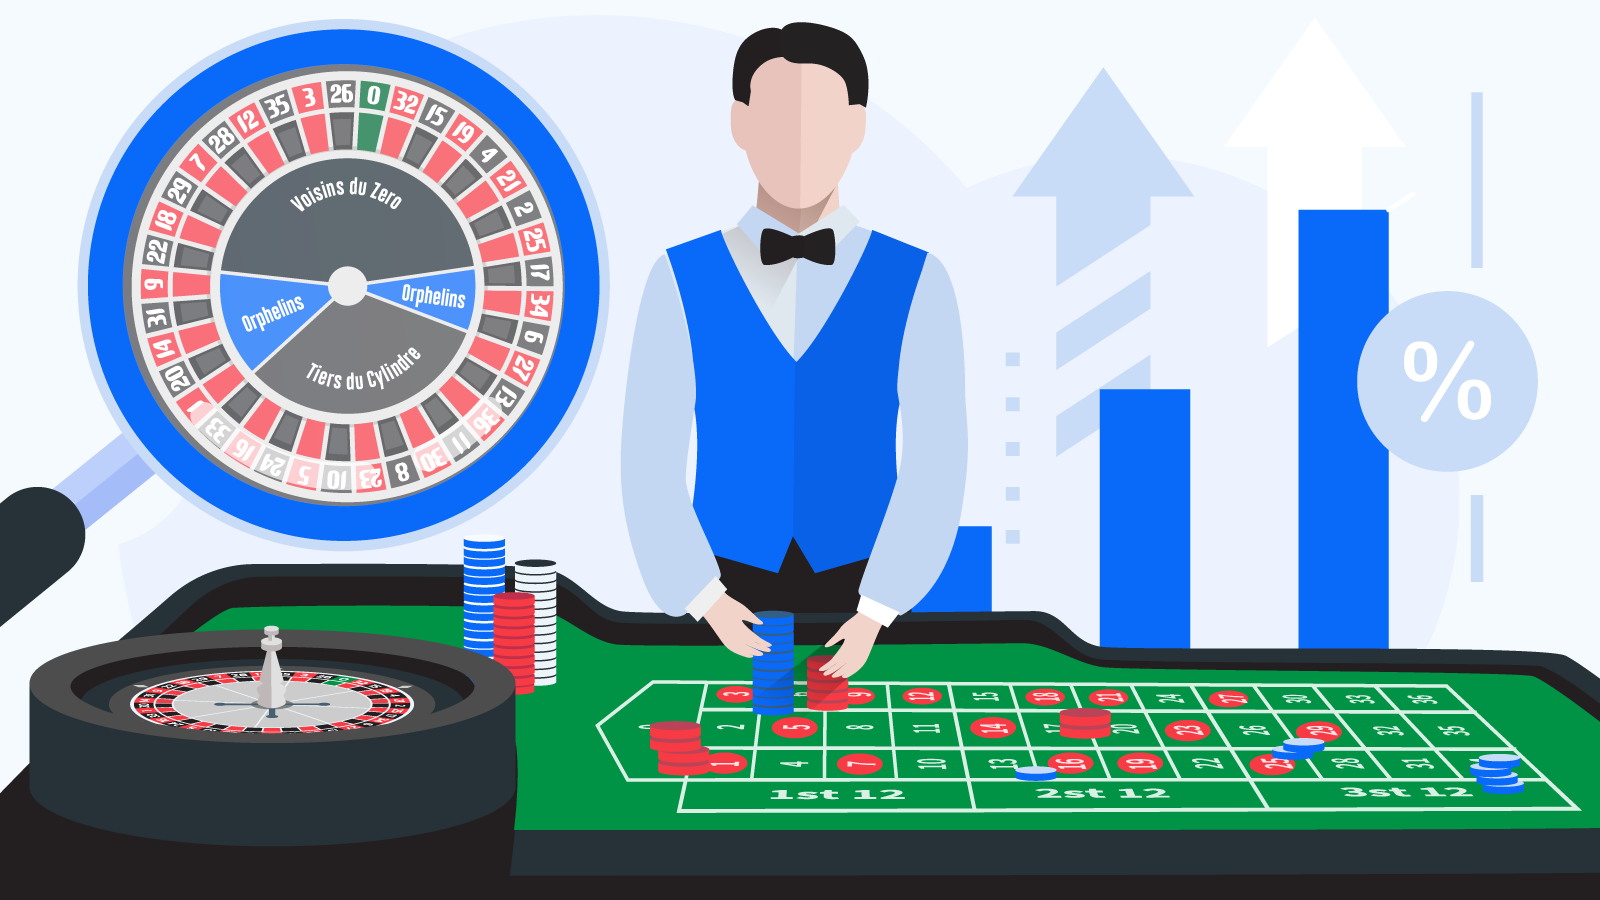 Called Bets in Roulette